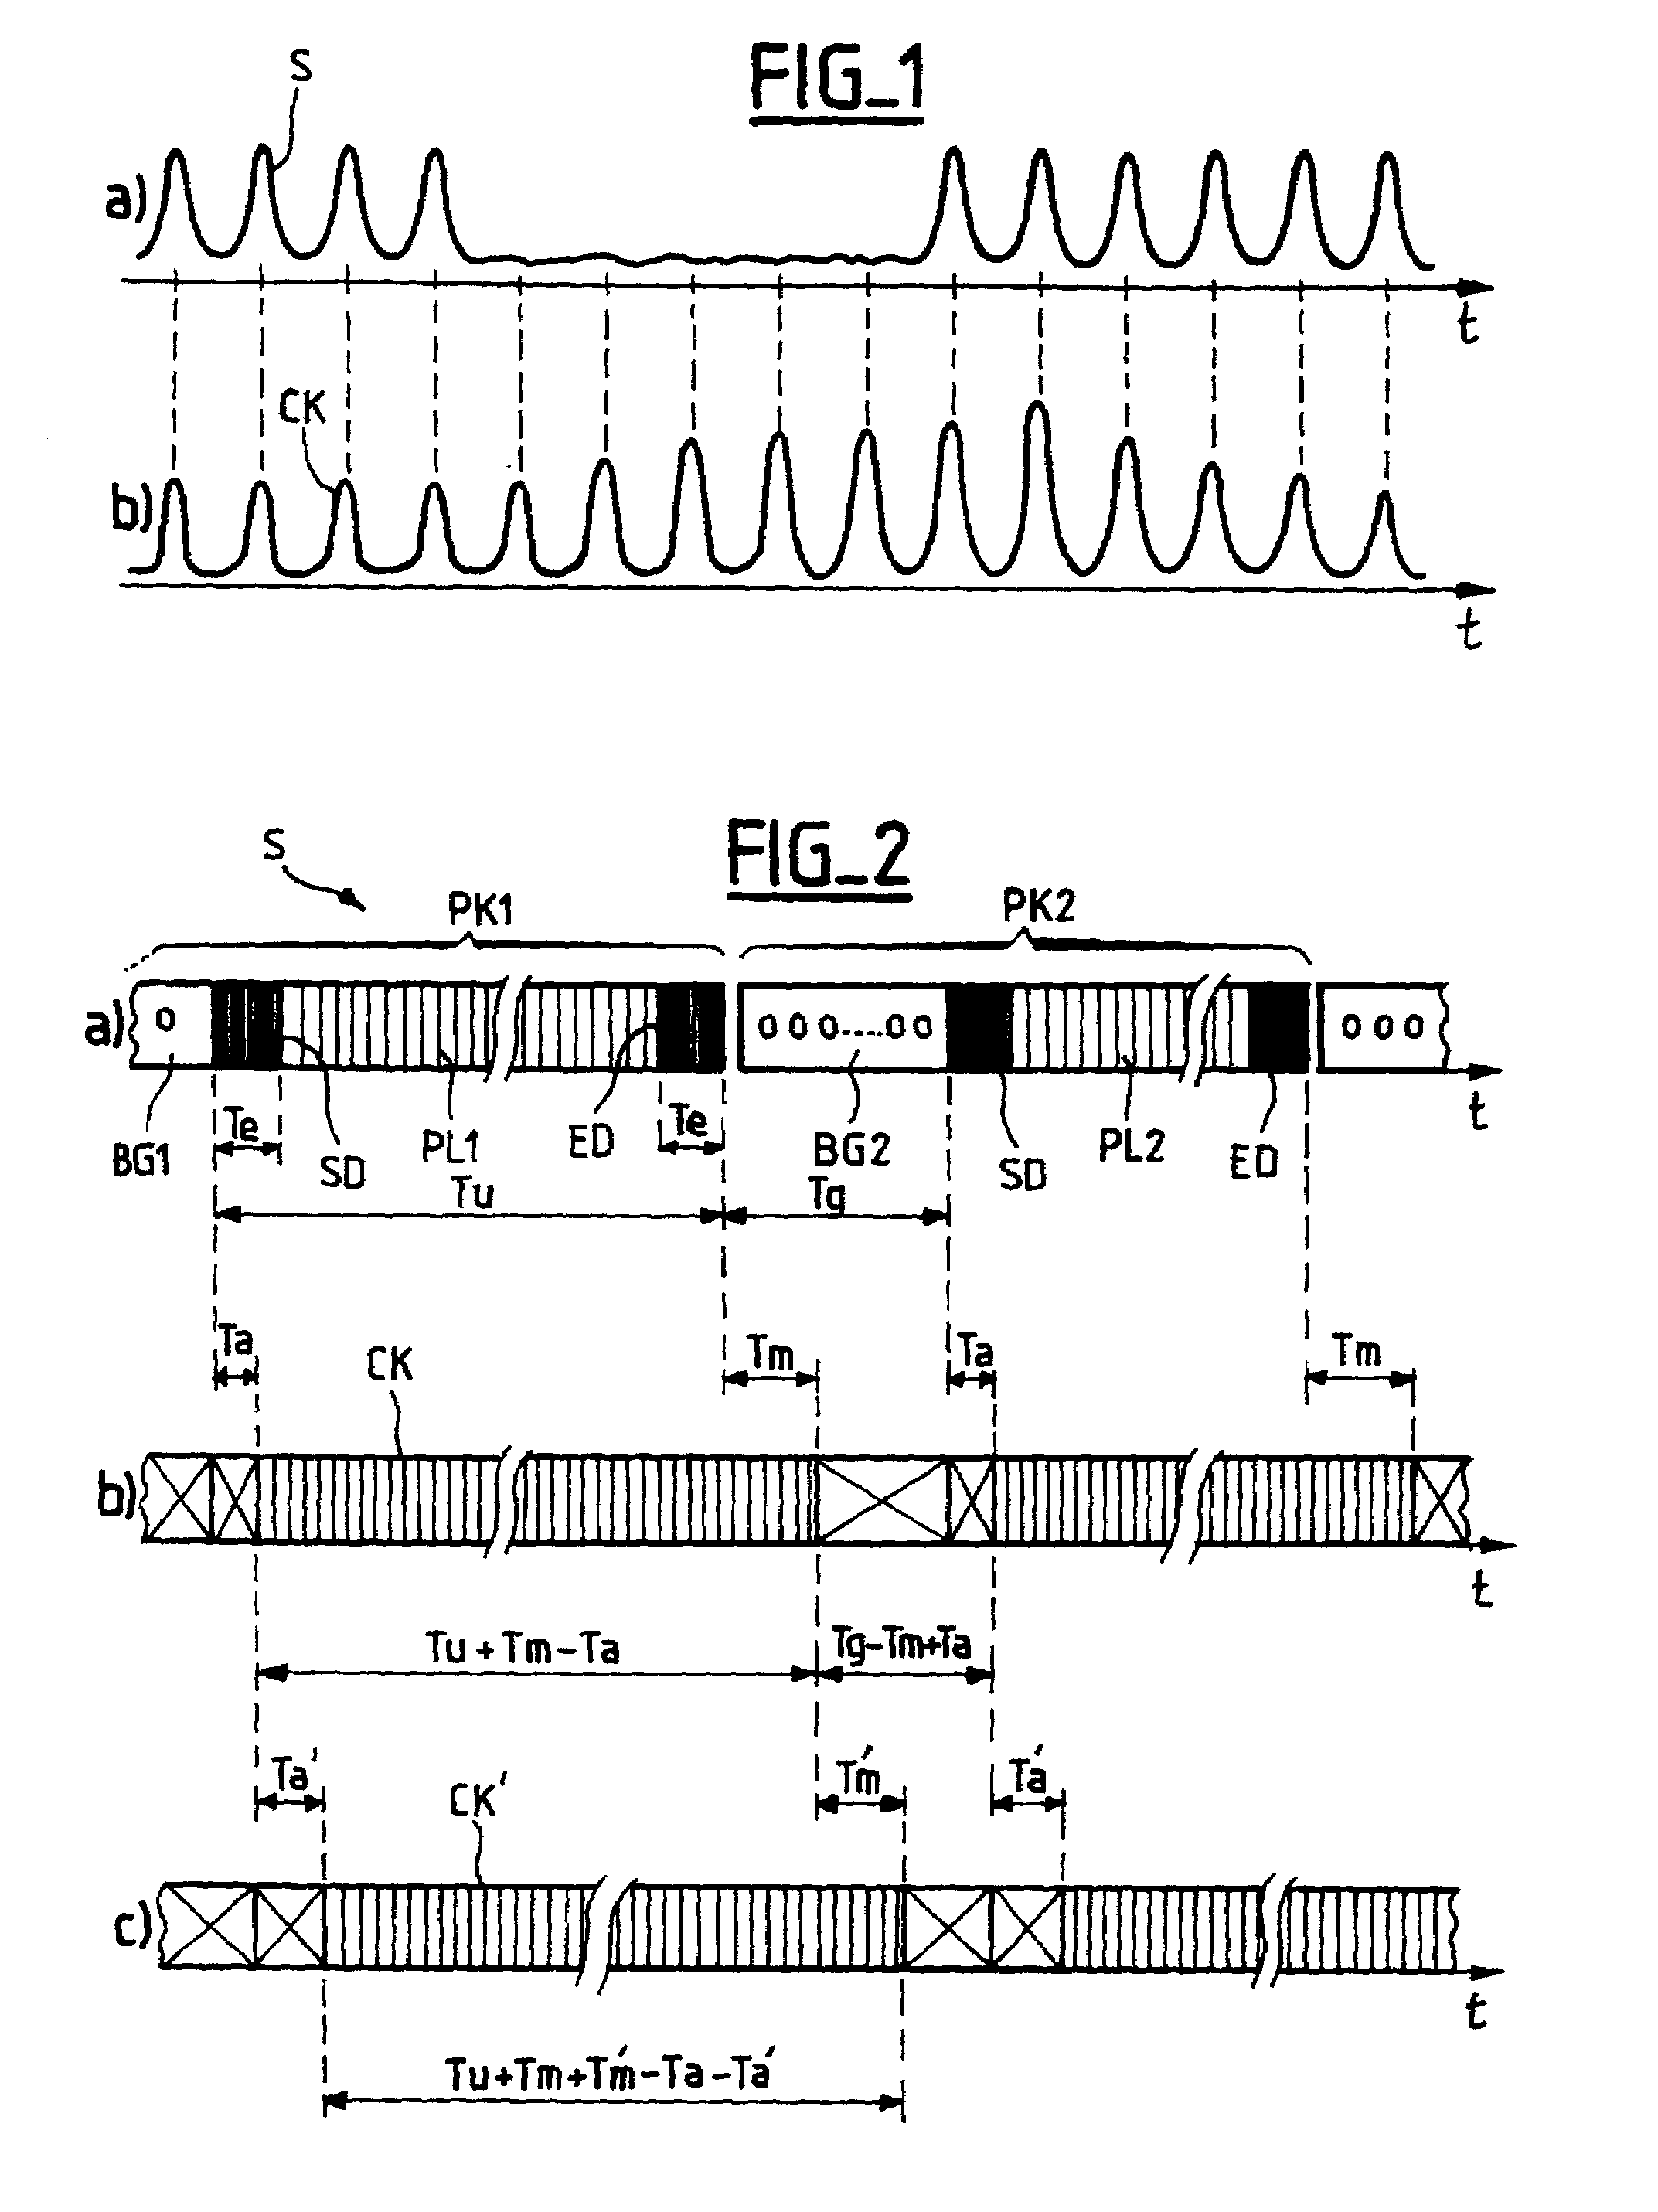 Optical clock recovery device for recovering the clock from an optical signal